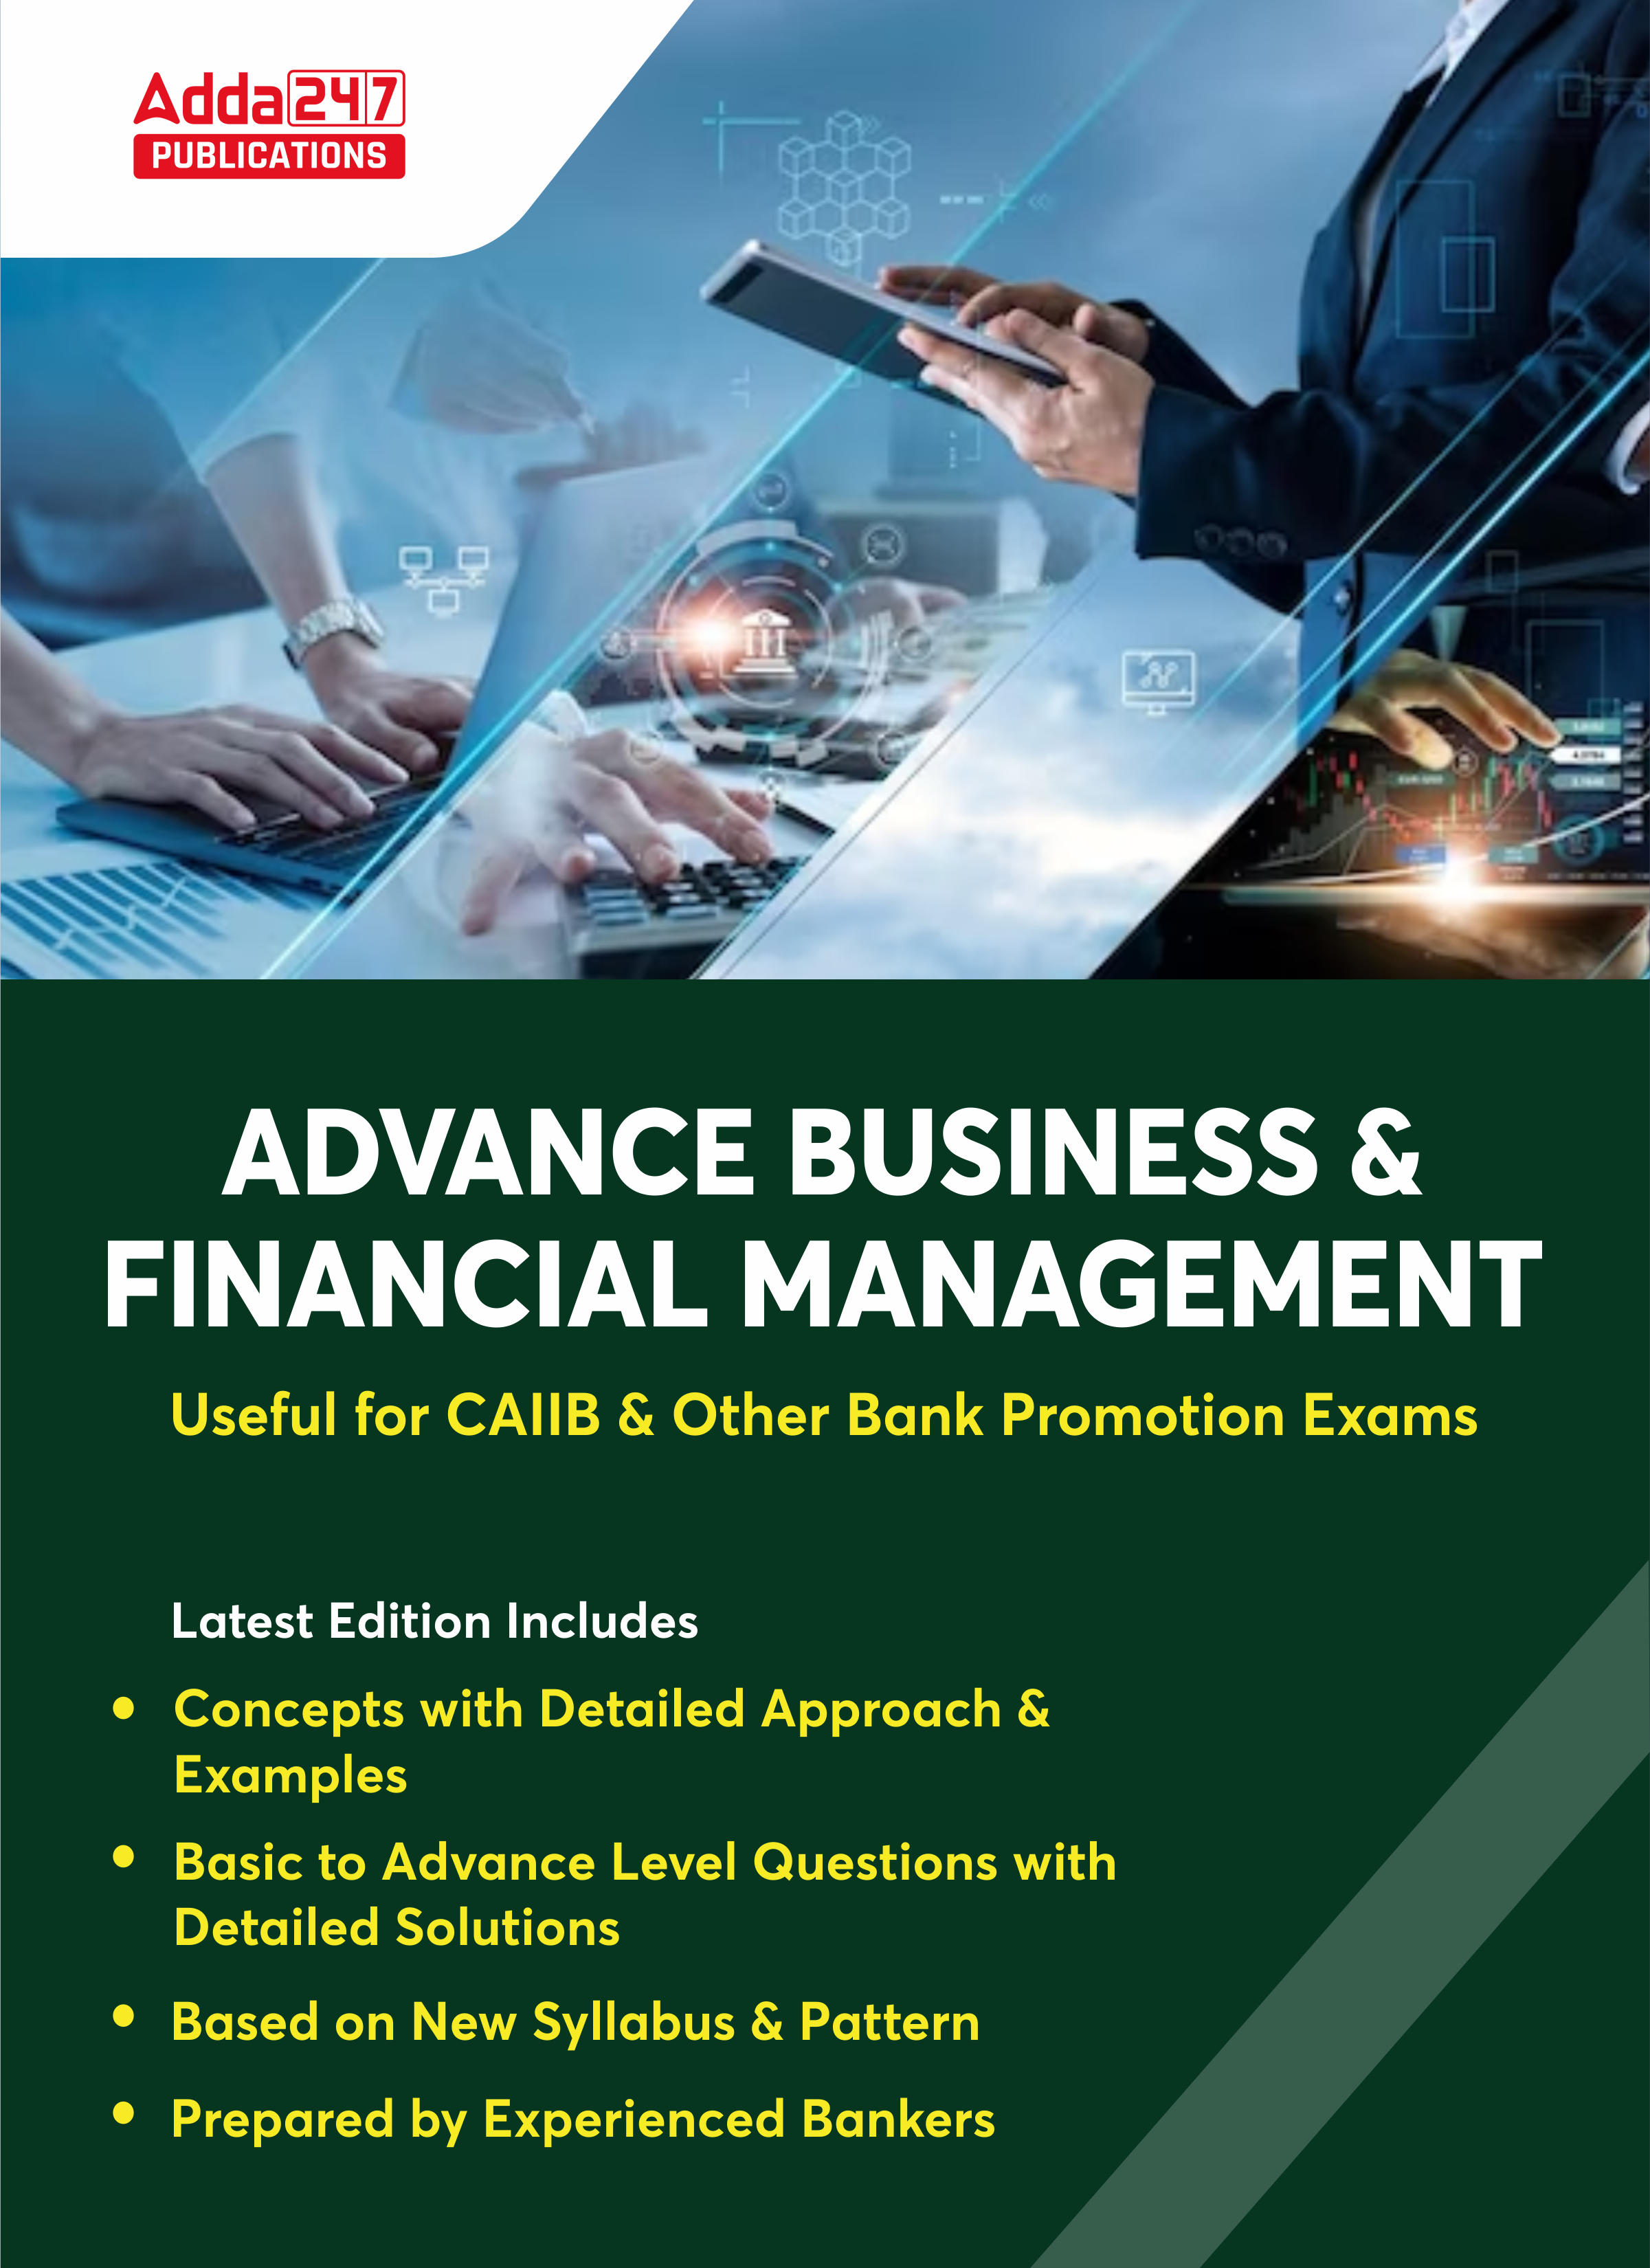 A complete ebook for caiib advance business and financial management